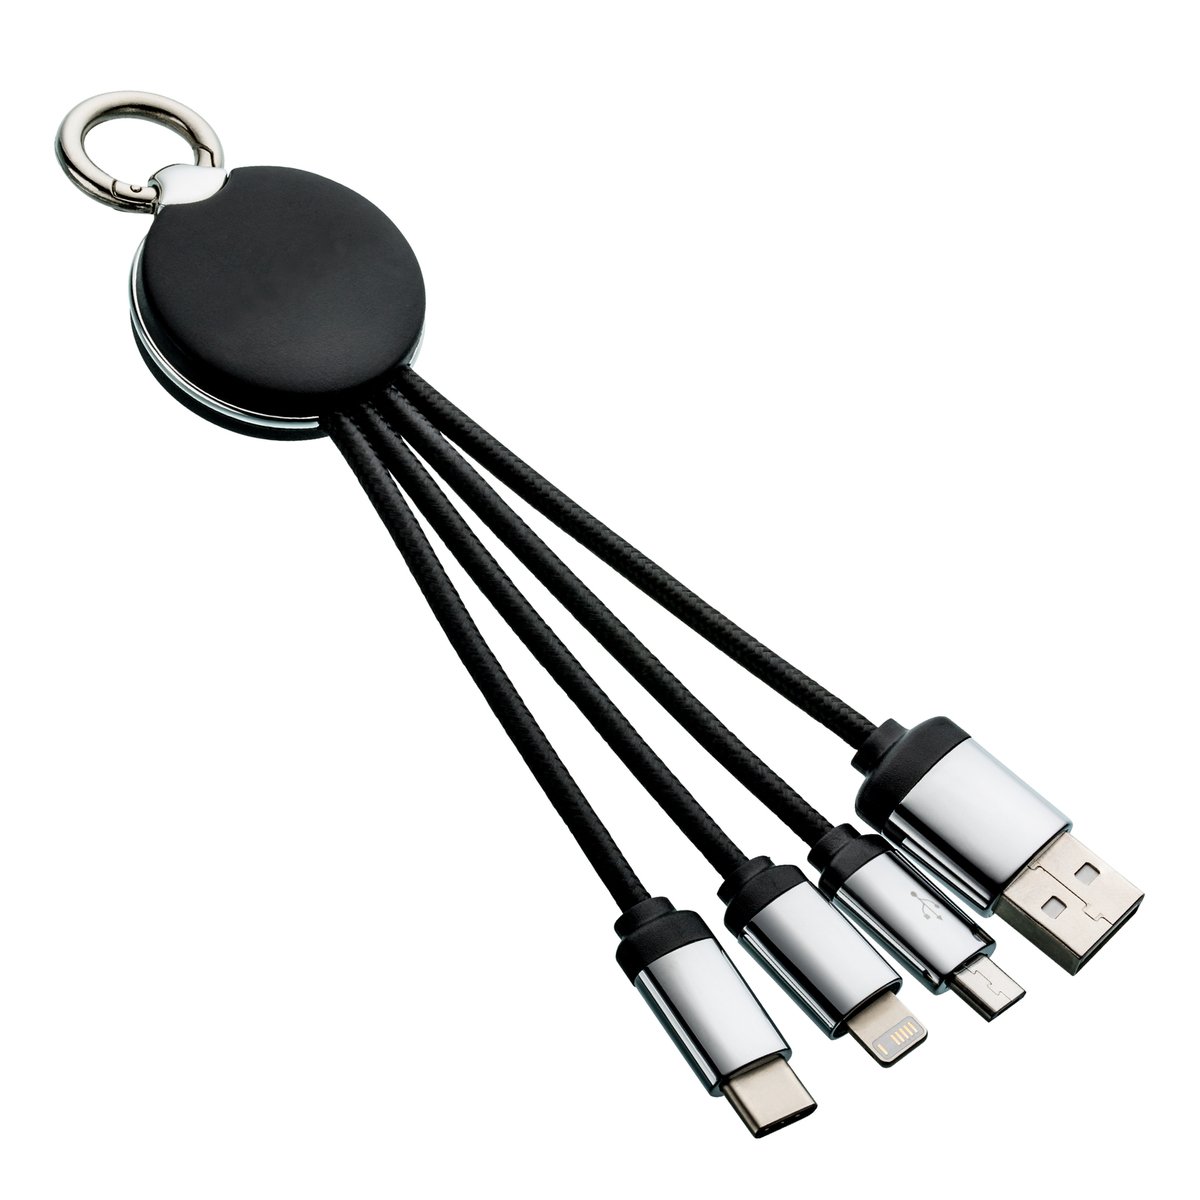 3-in-1 Charging Cable with Light REEVES-PUHALANI black/green